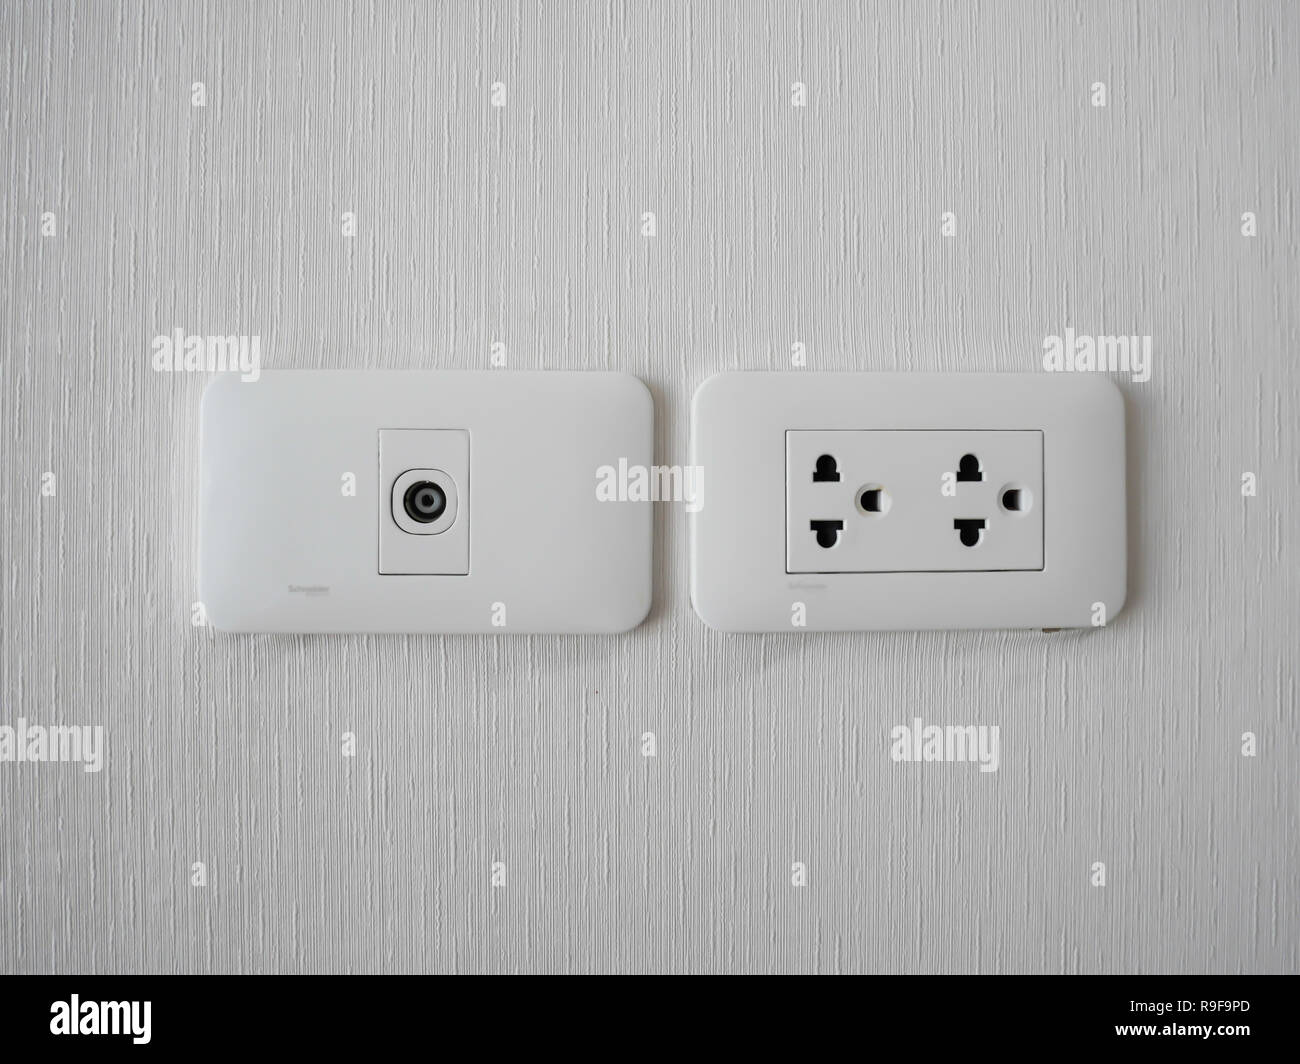 Plug Into Electricity Socket the power outlets on wall. sockets plug outlets with 220 volts (220V) AC style. White electrical outlet on wall in th Stock Photo - Alamy